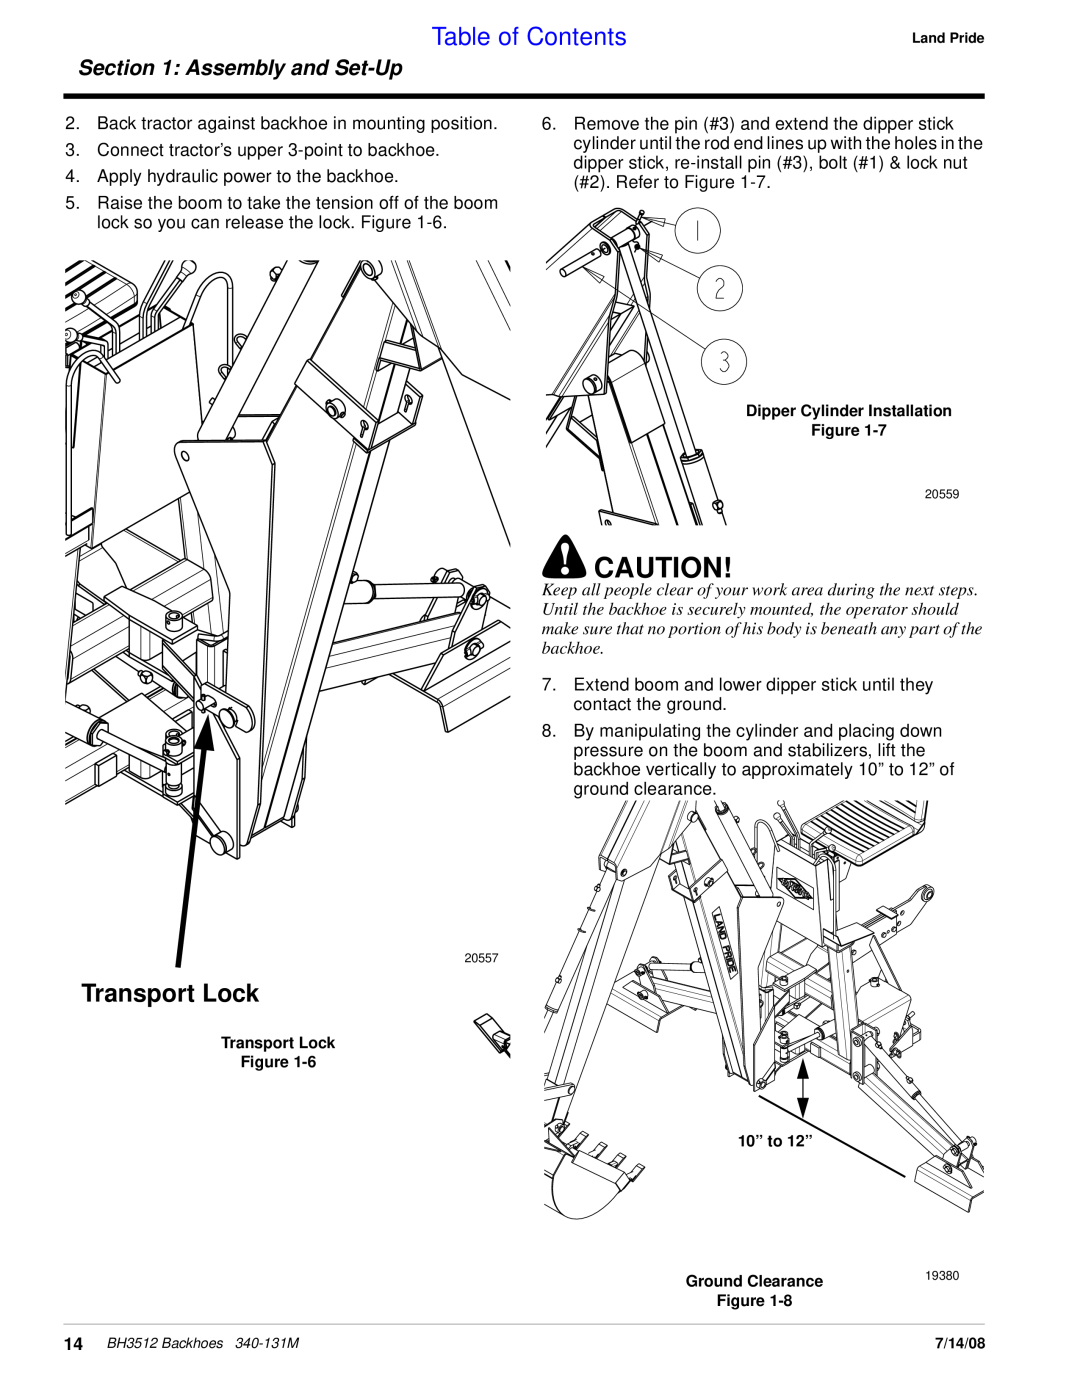 Land Pride BH3512 manual Transport Lock, Table of Contents, Assembly and Set-Up 